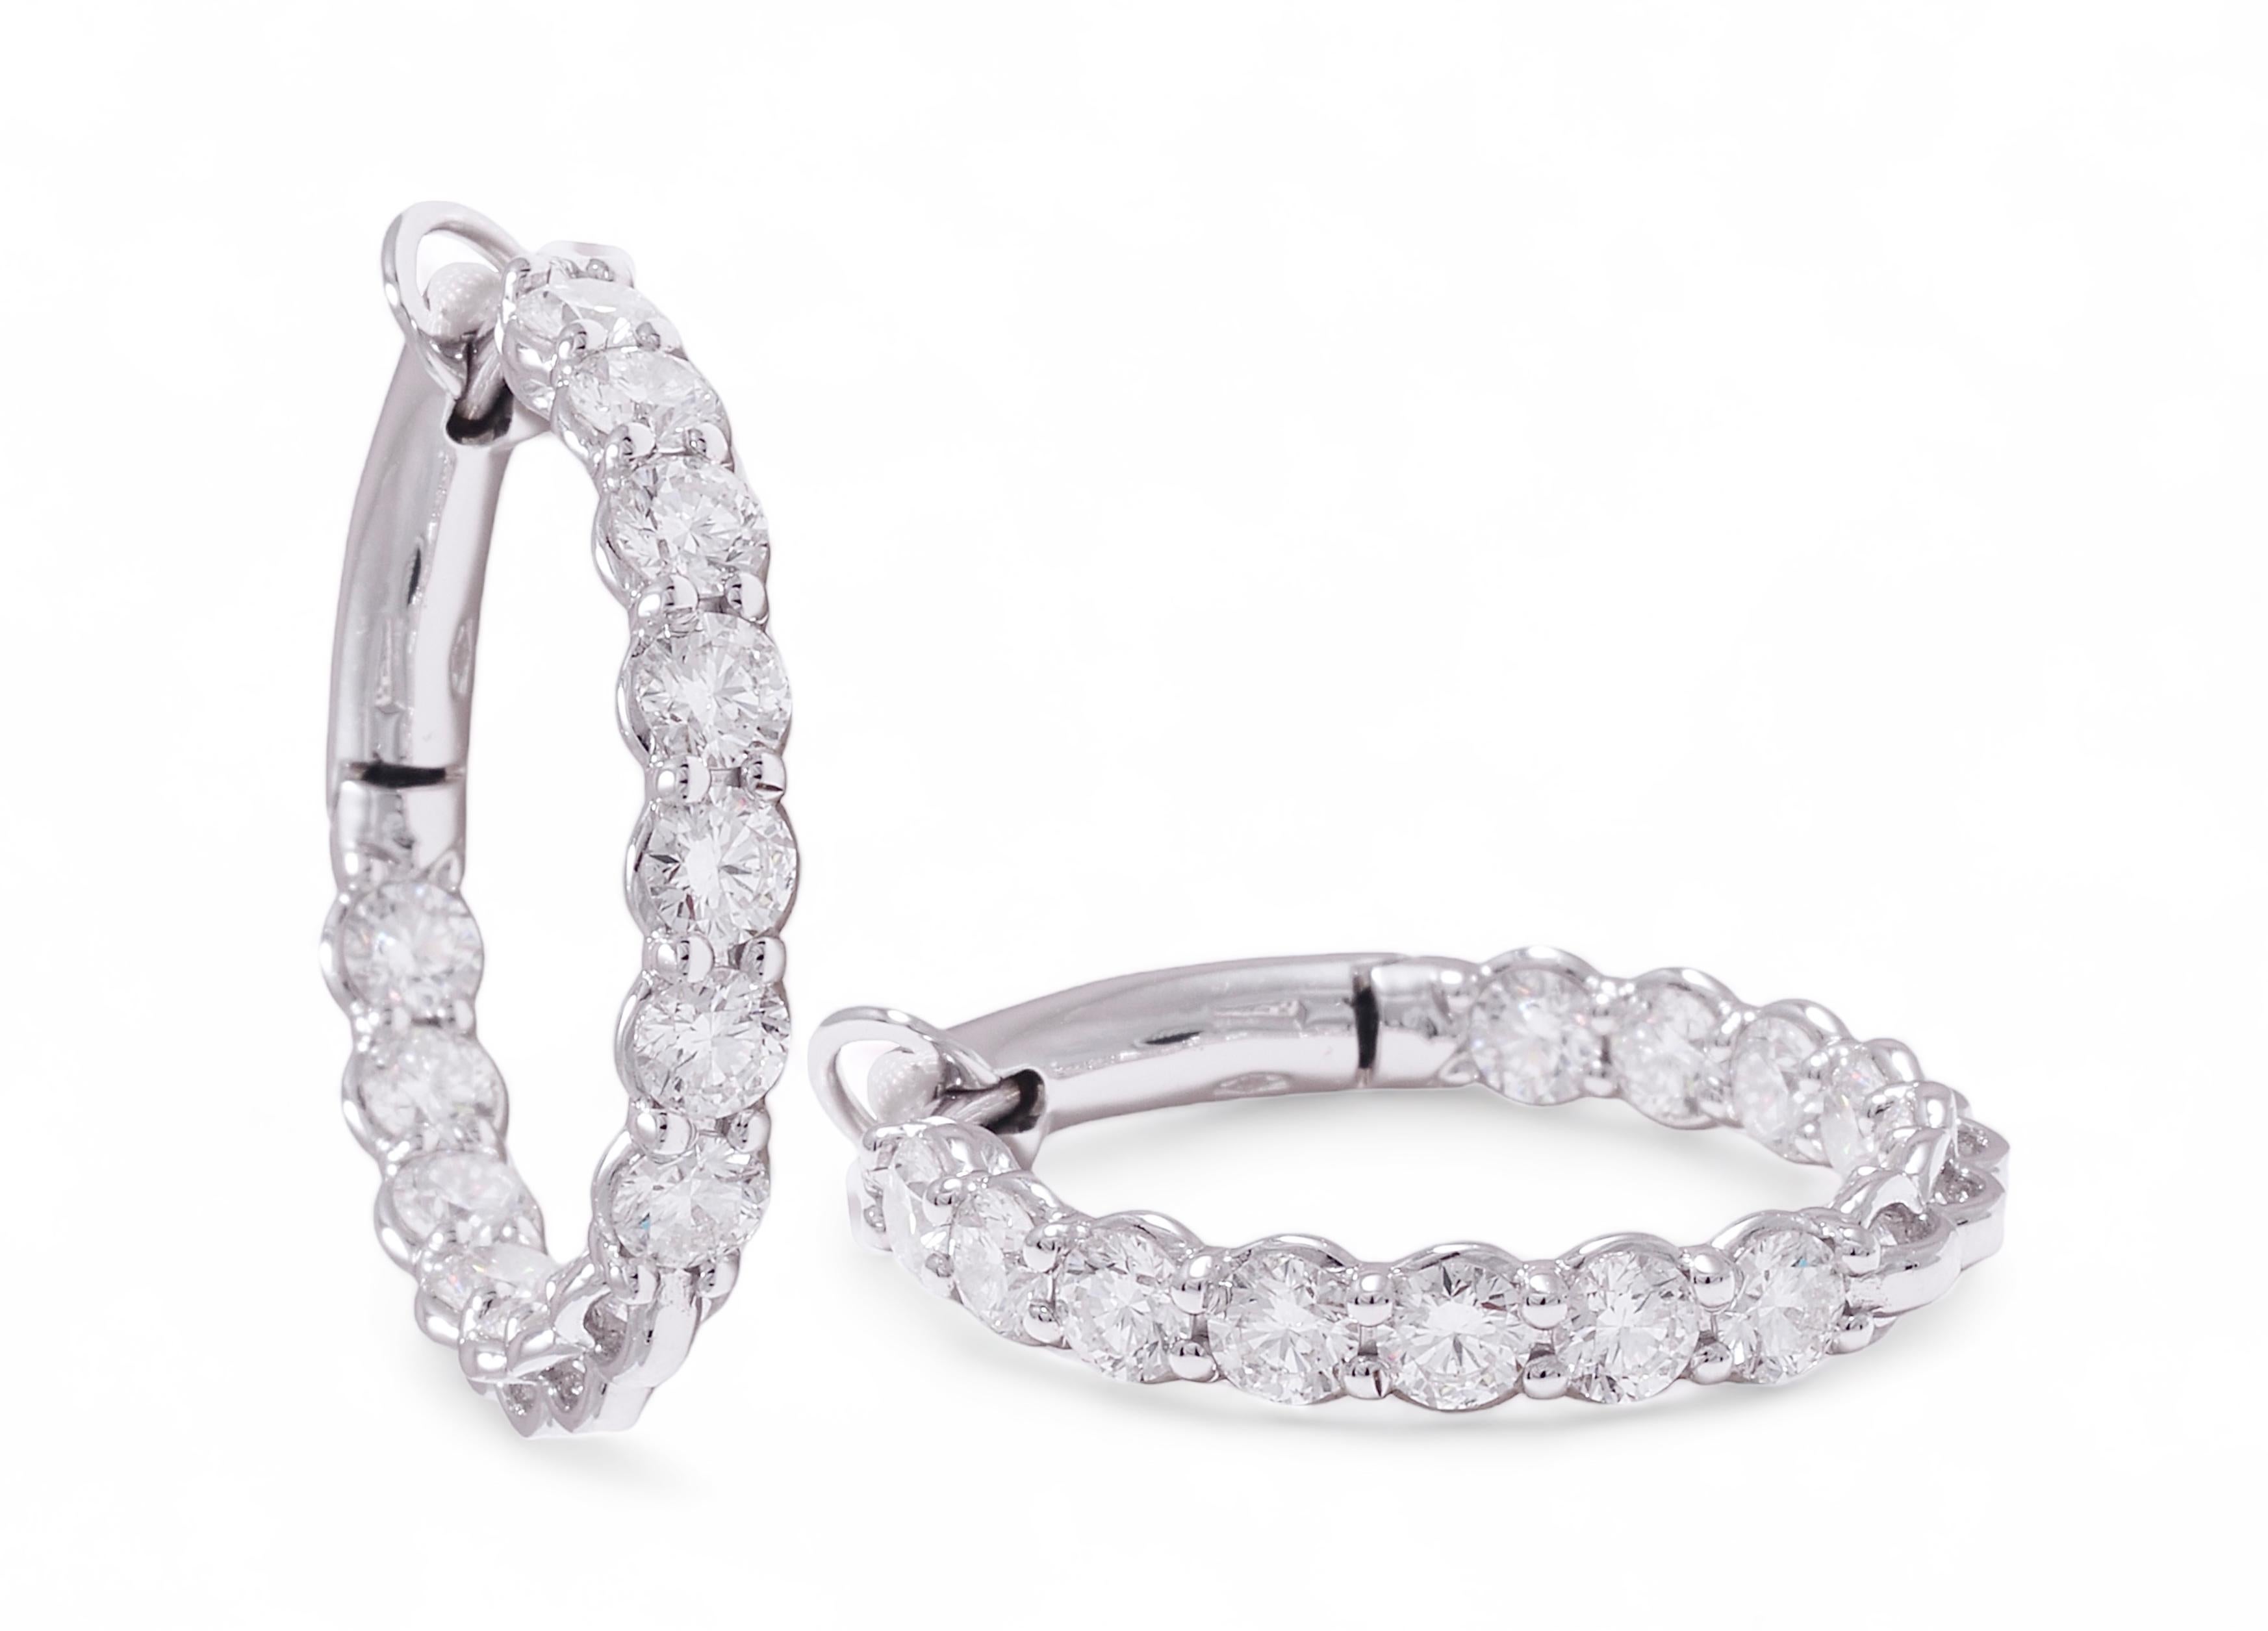  18 kt. White Gold Loop Earrings With 3.14 ct. Diamonds  For Sale 1